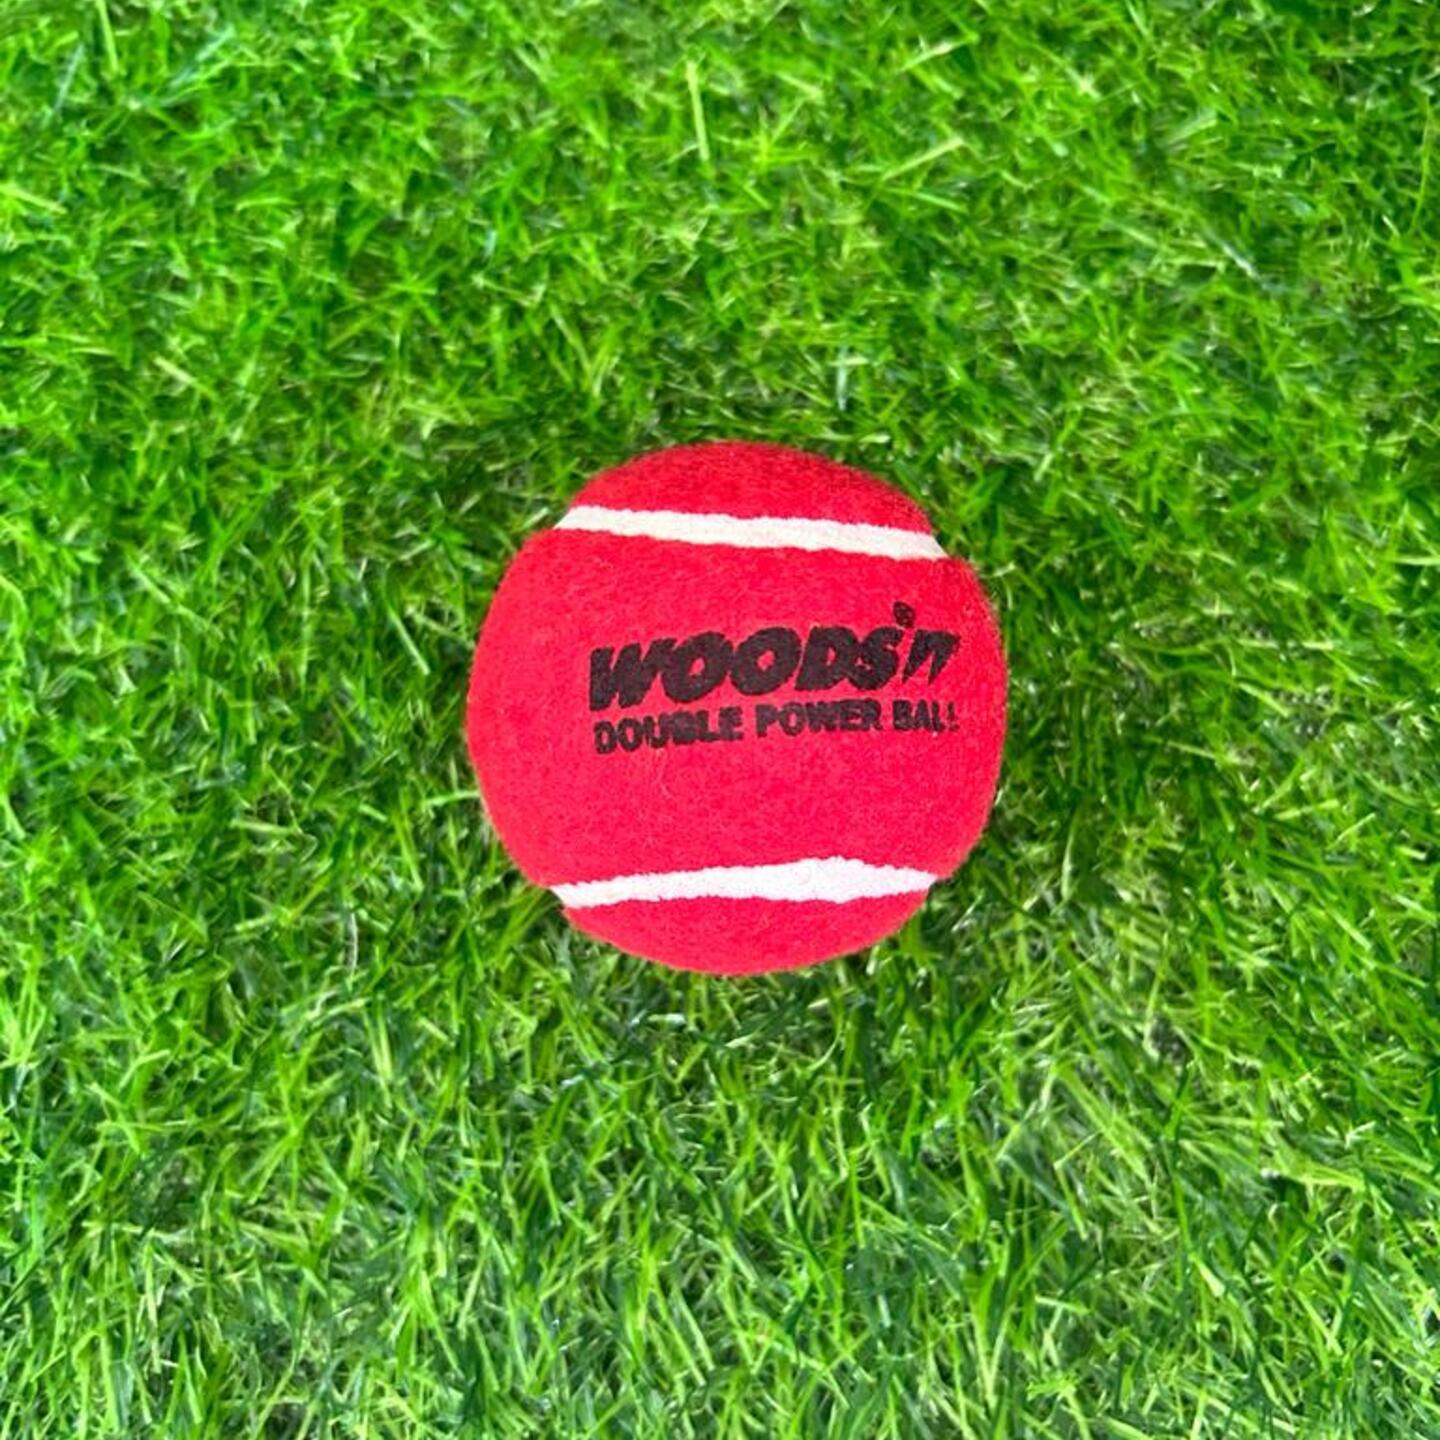 WOODS DOUBLE POWER CRICKET TENNIS BALL  HEAVY RED